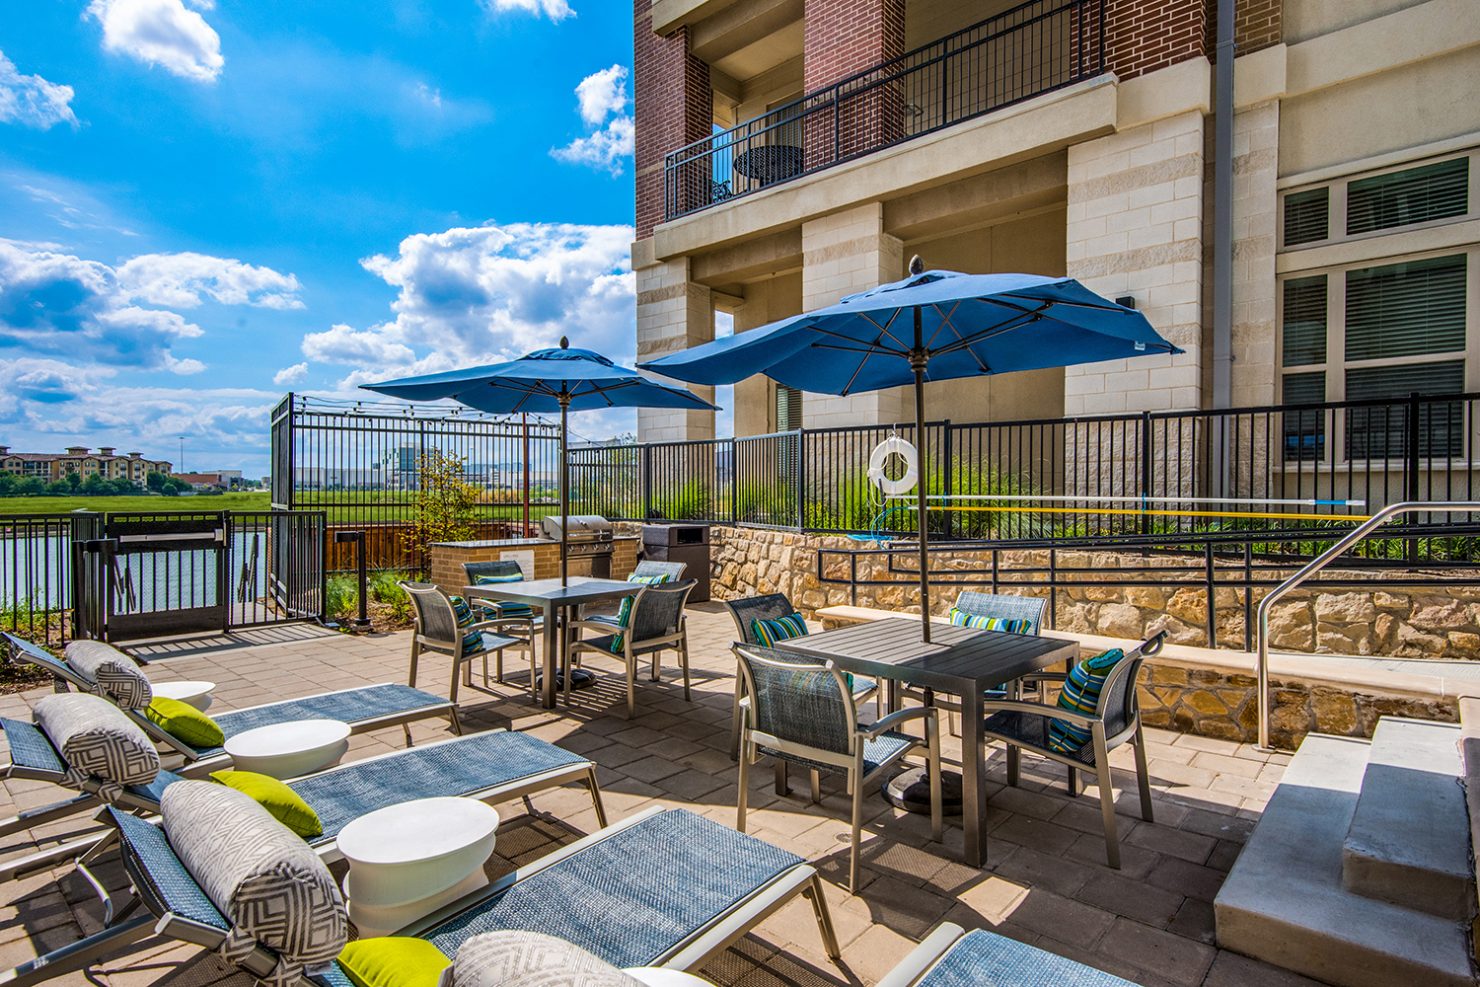 Outdoor lounge area with umbrella tables, chairs, and loungers with view of Lake Carolyn